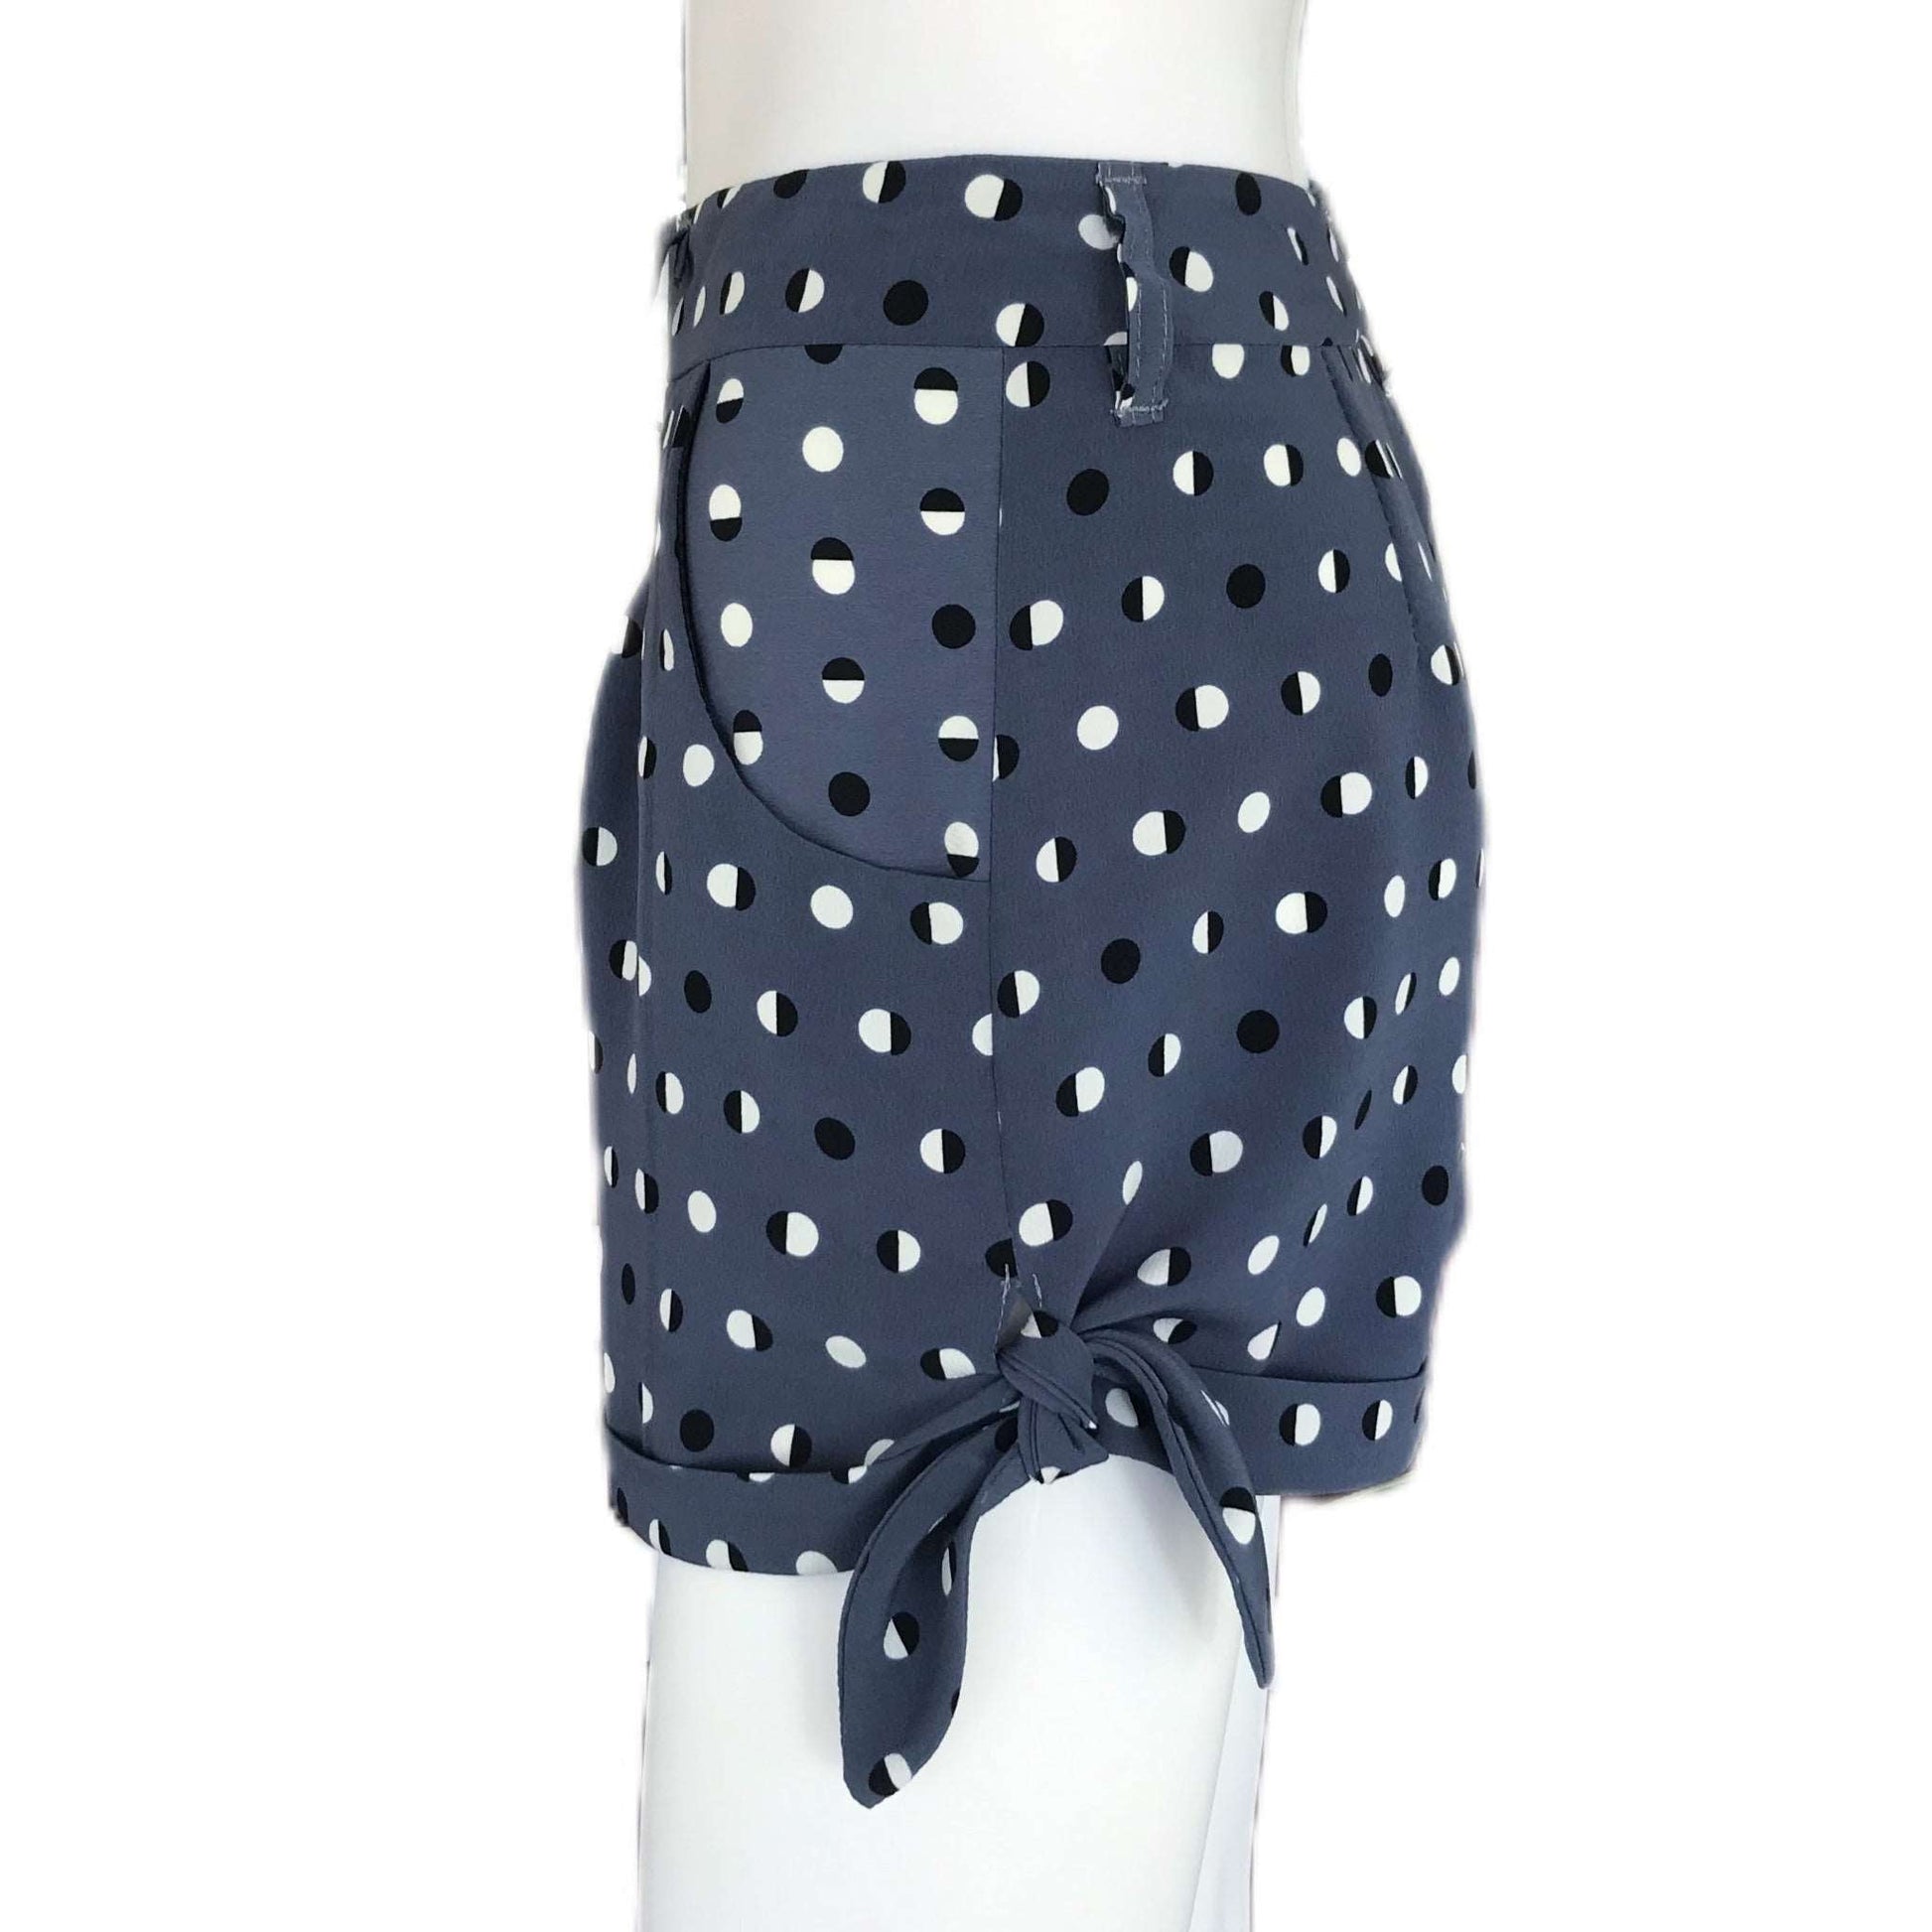 Moon Phases Women's Cuffed Shorts with Side Ties